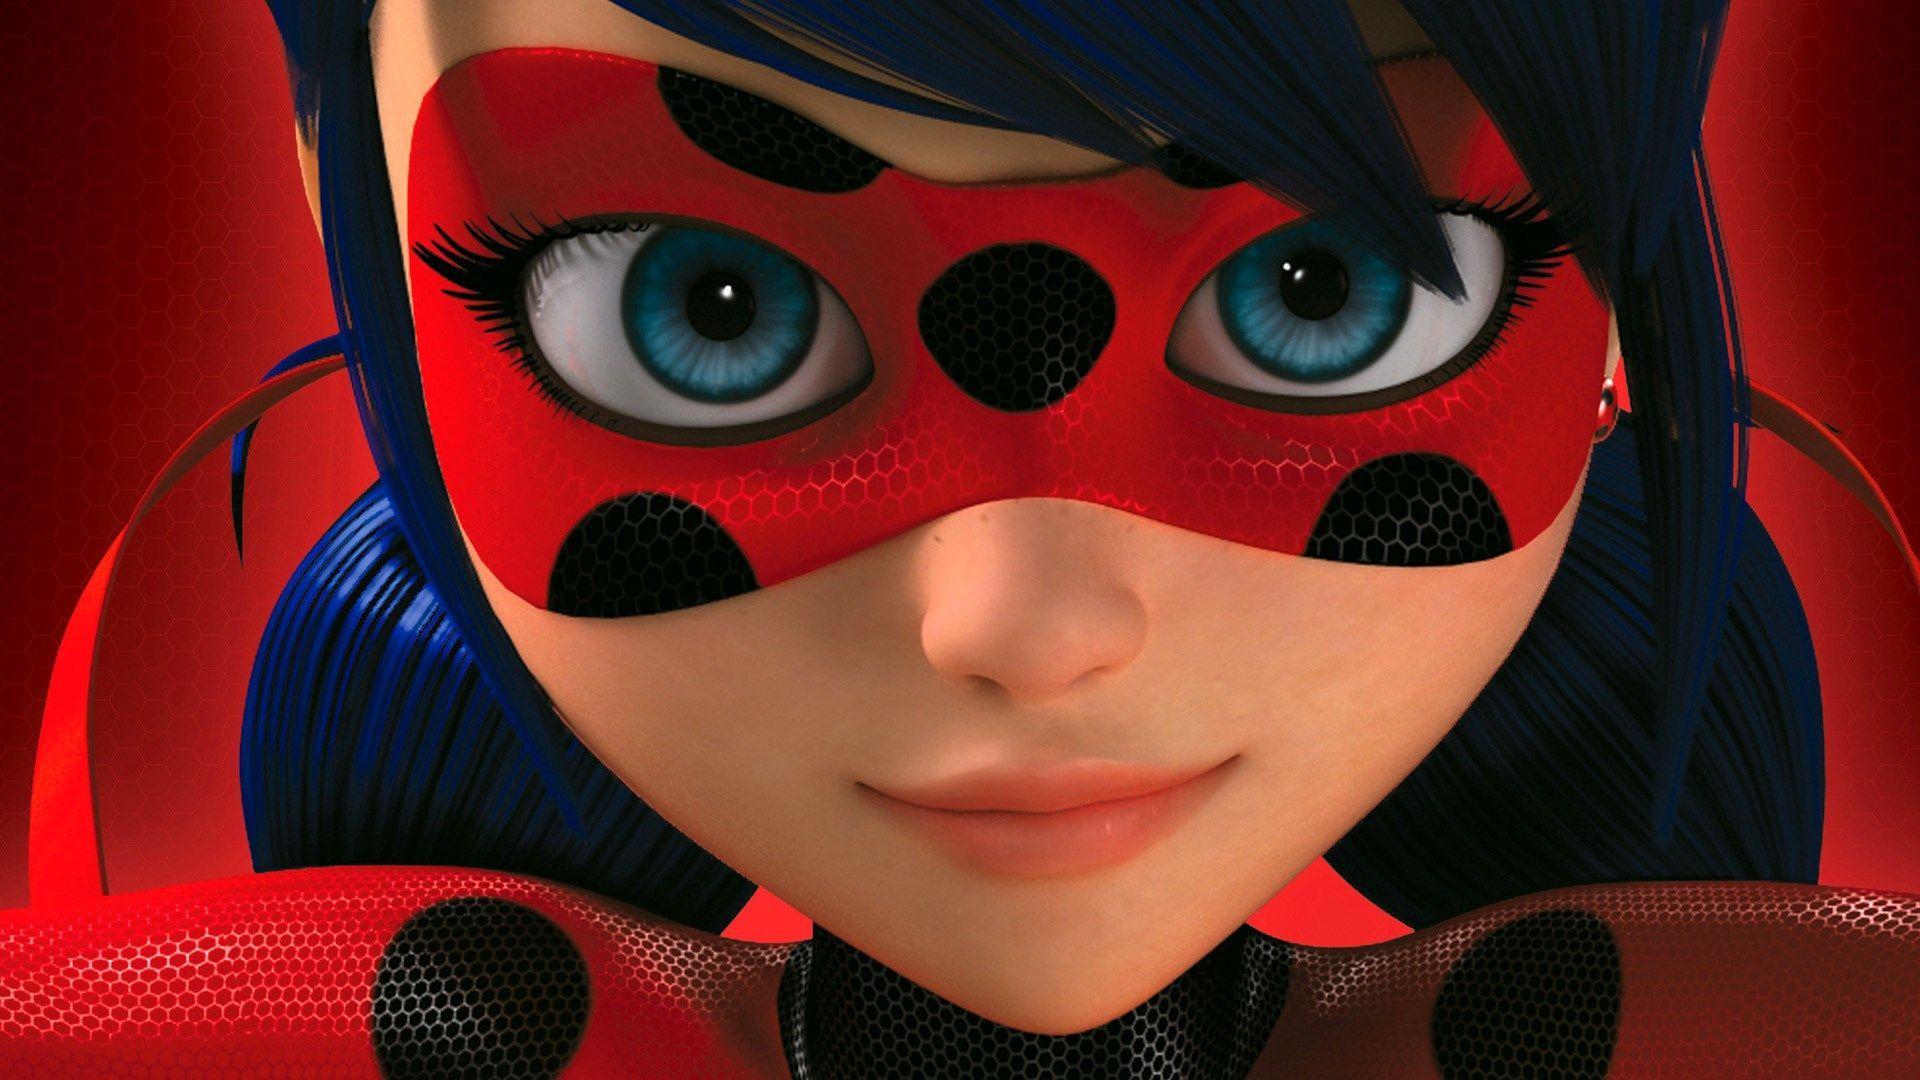 High Quality miraculous tales of ladybug and cat noir wallpaper, Cid